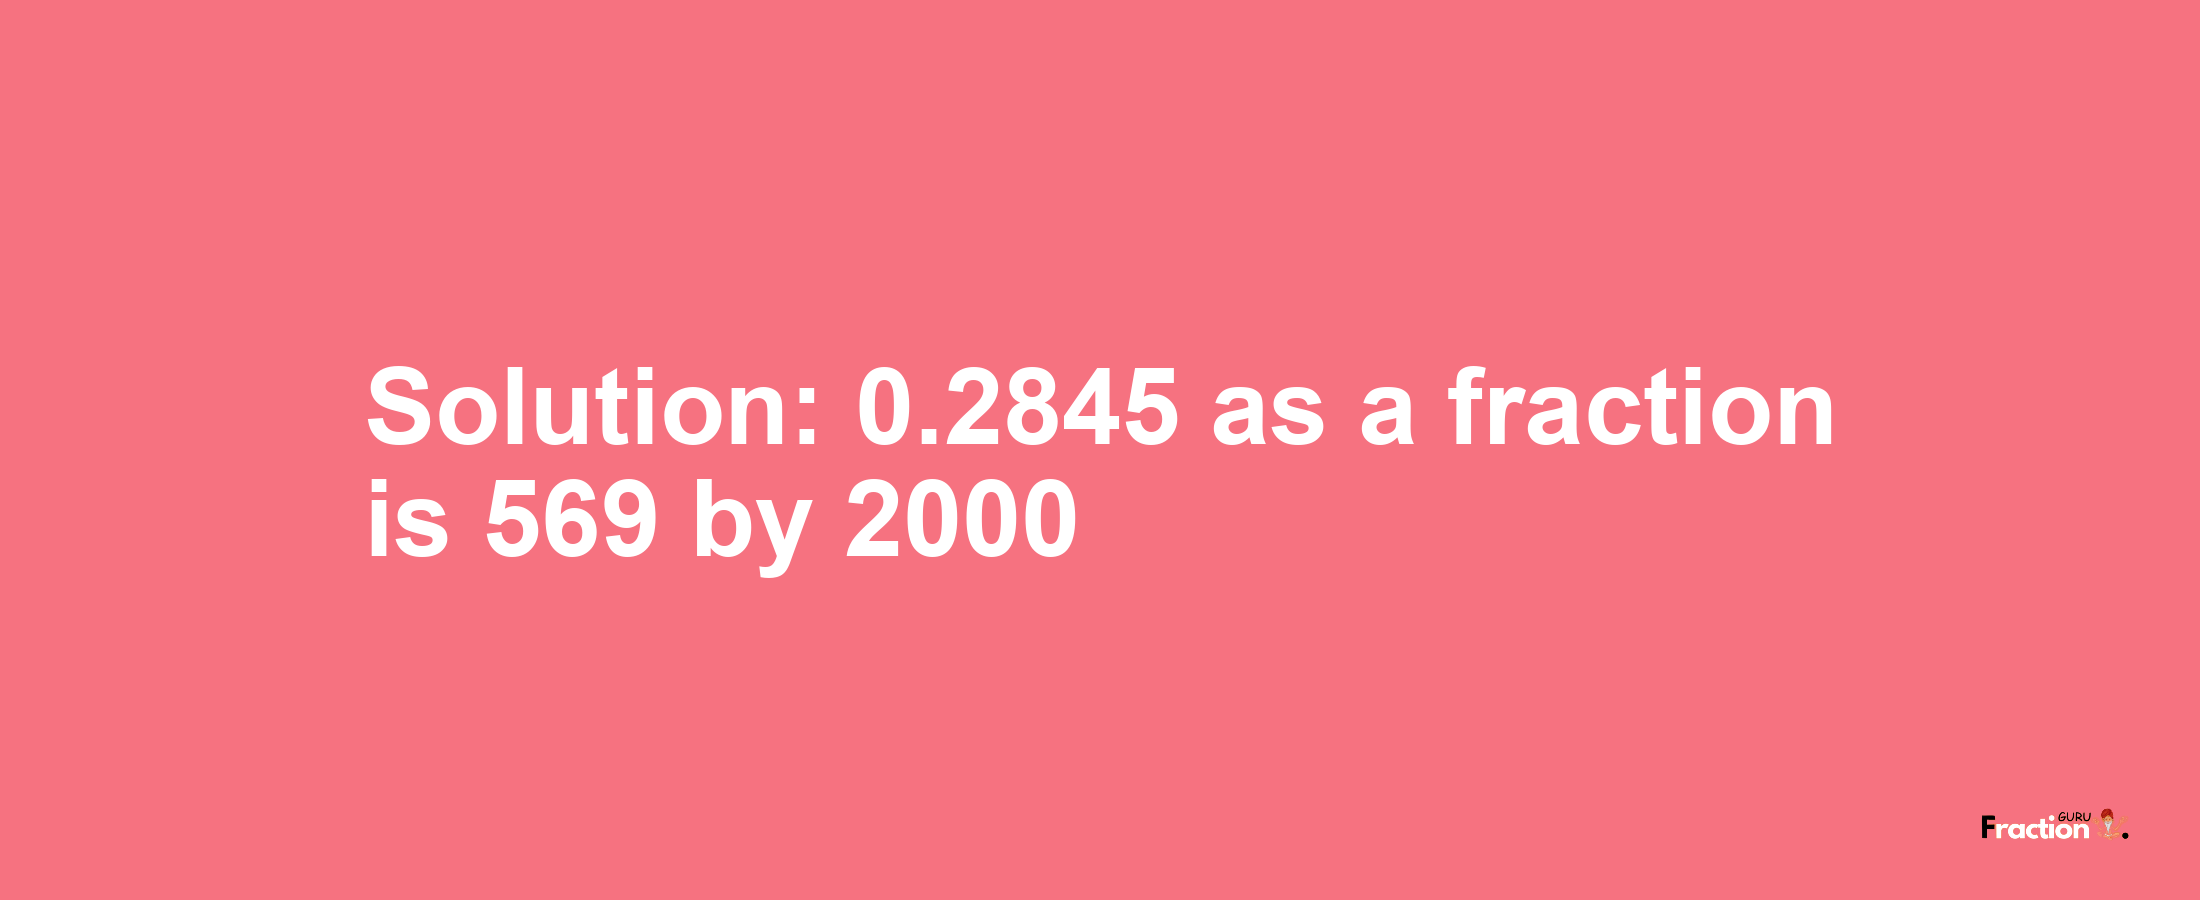 Solution:0.2845 as a fraction is 569/2000